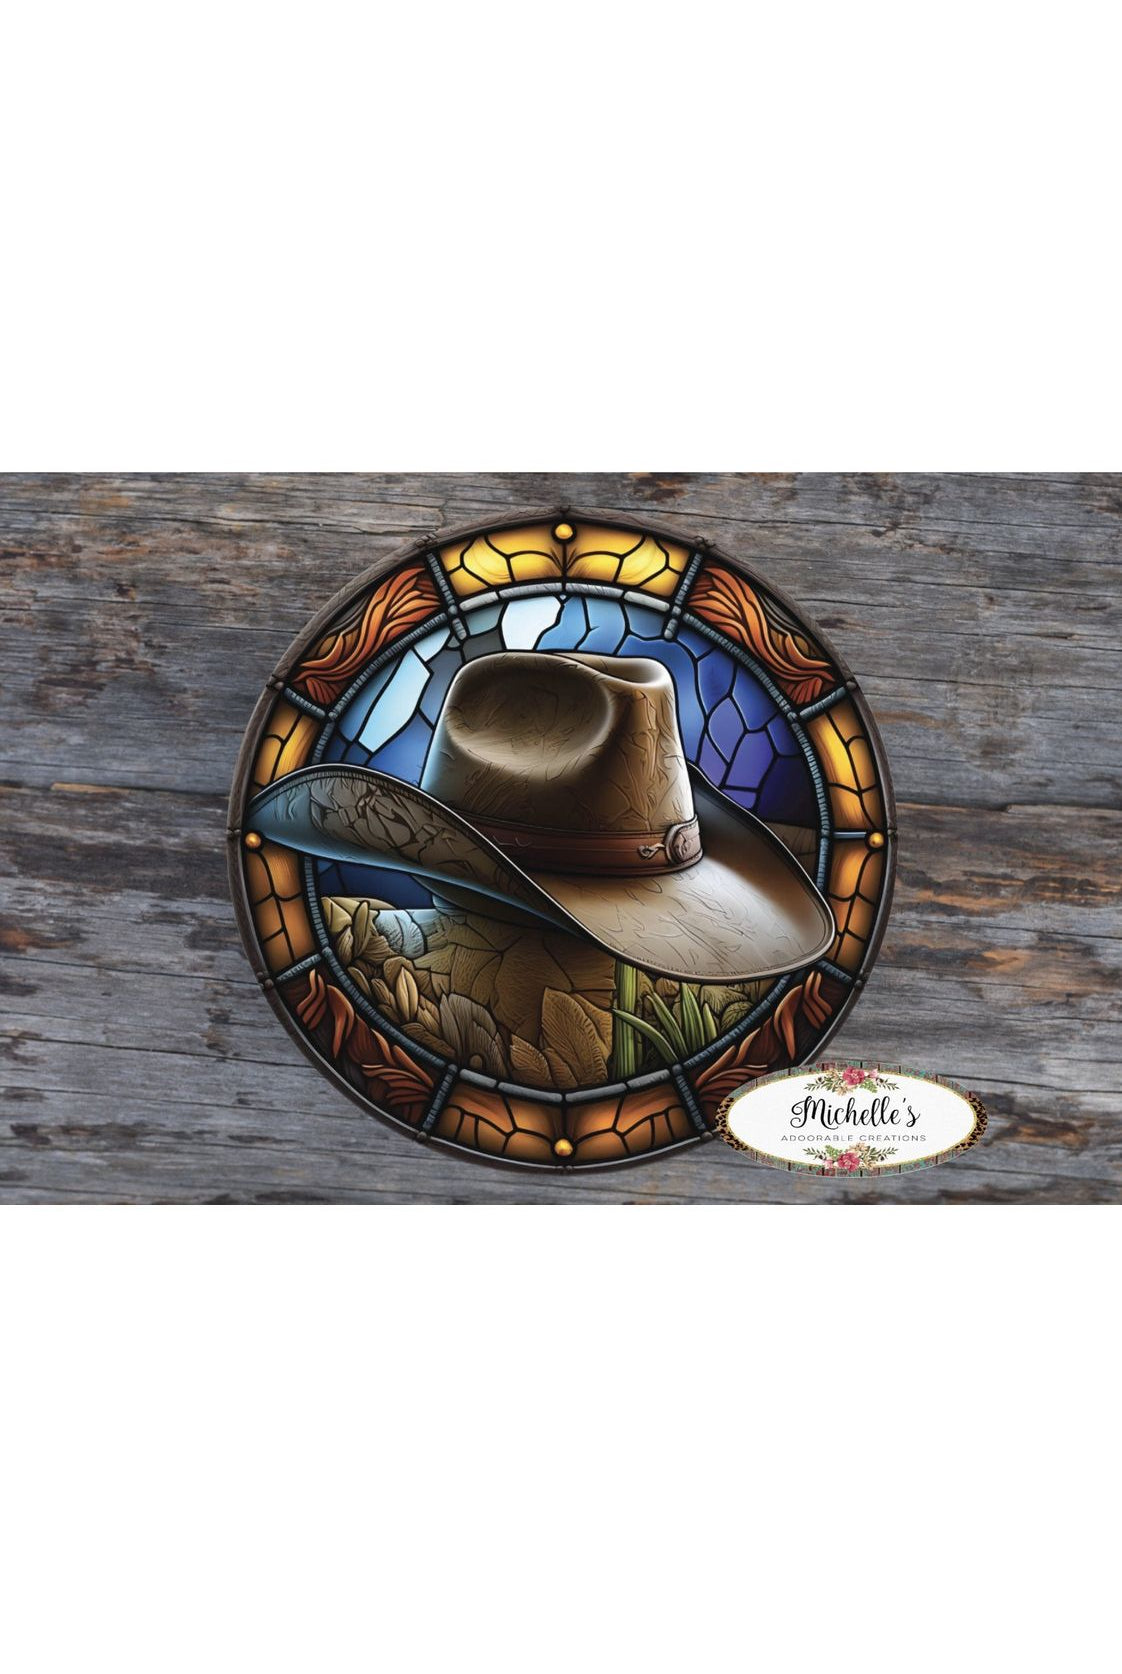 Shop For Faux Stained Glass Cowboy Hat Western Sign - Wreath Enhancement